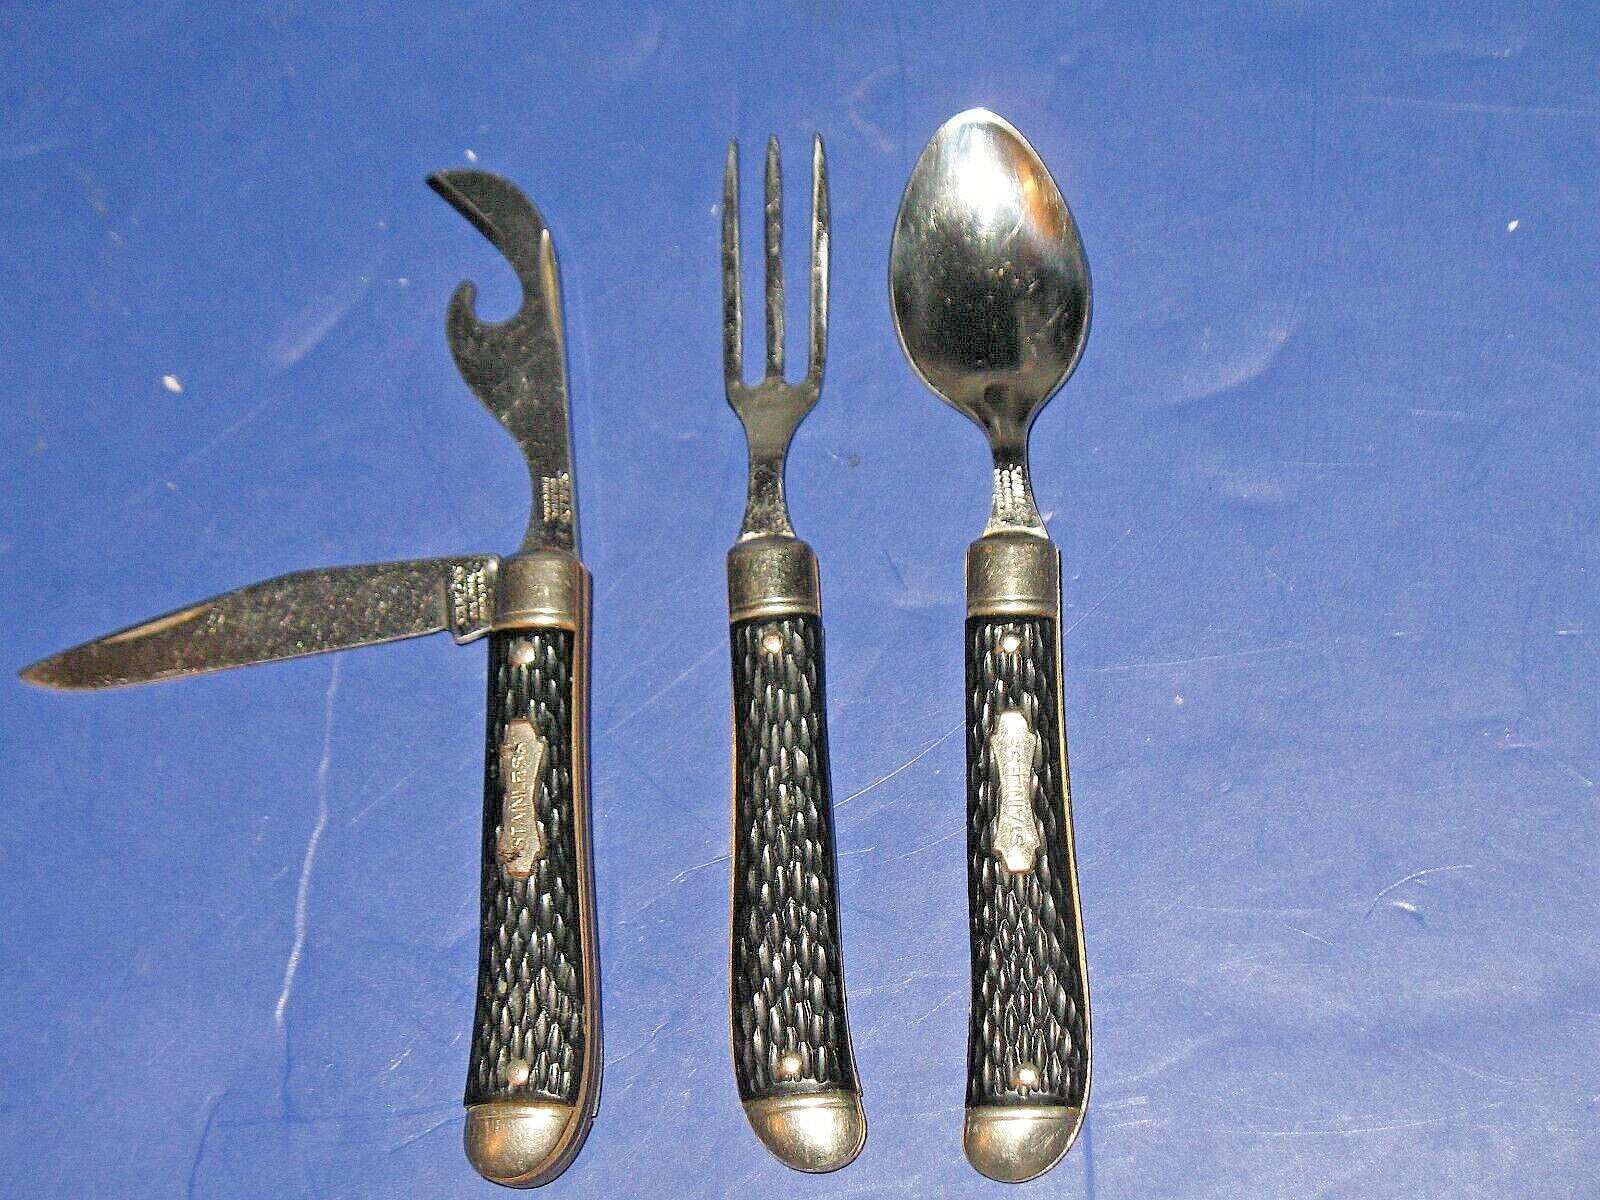 COLONIAL - 3 PIECE LOT VINTAGE FOLDING FORK, SPOON, KNIFE AND BOTTLE OPENER USA